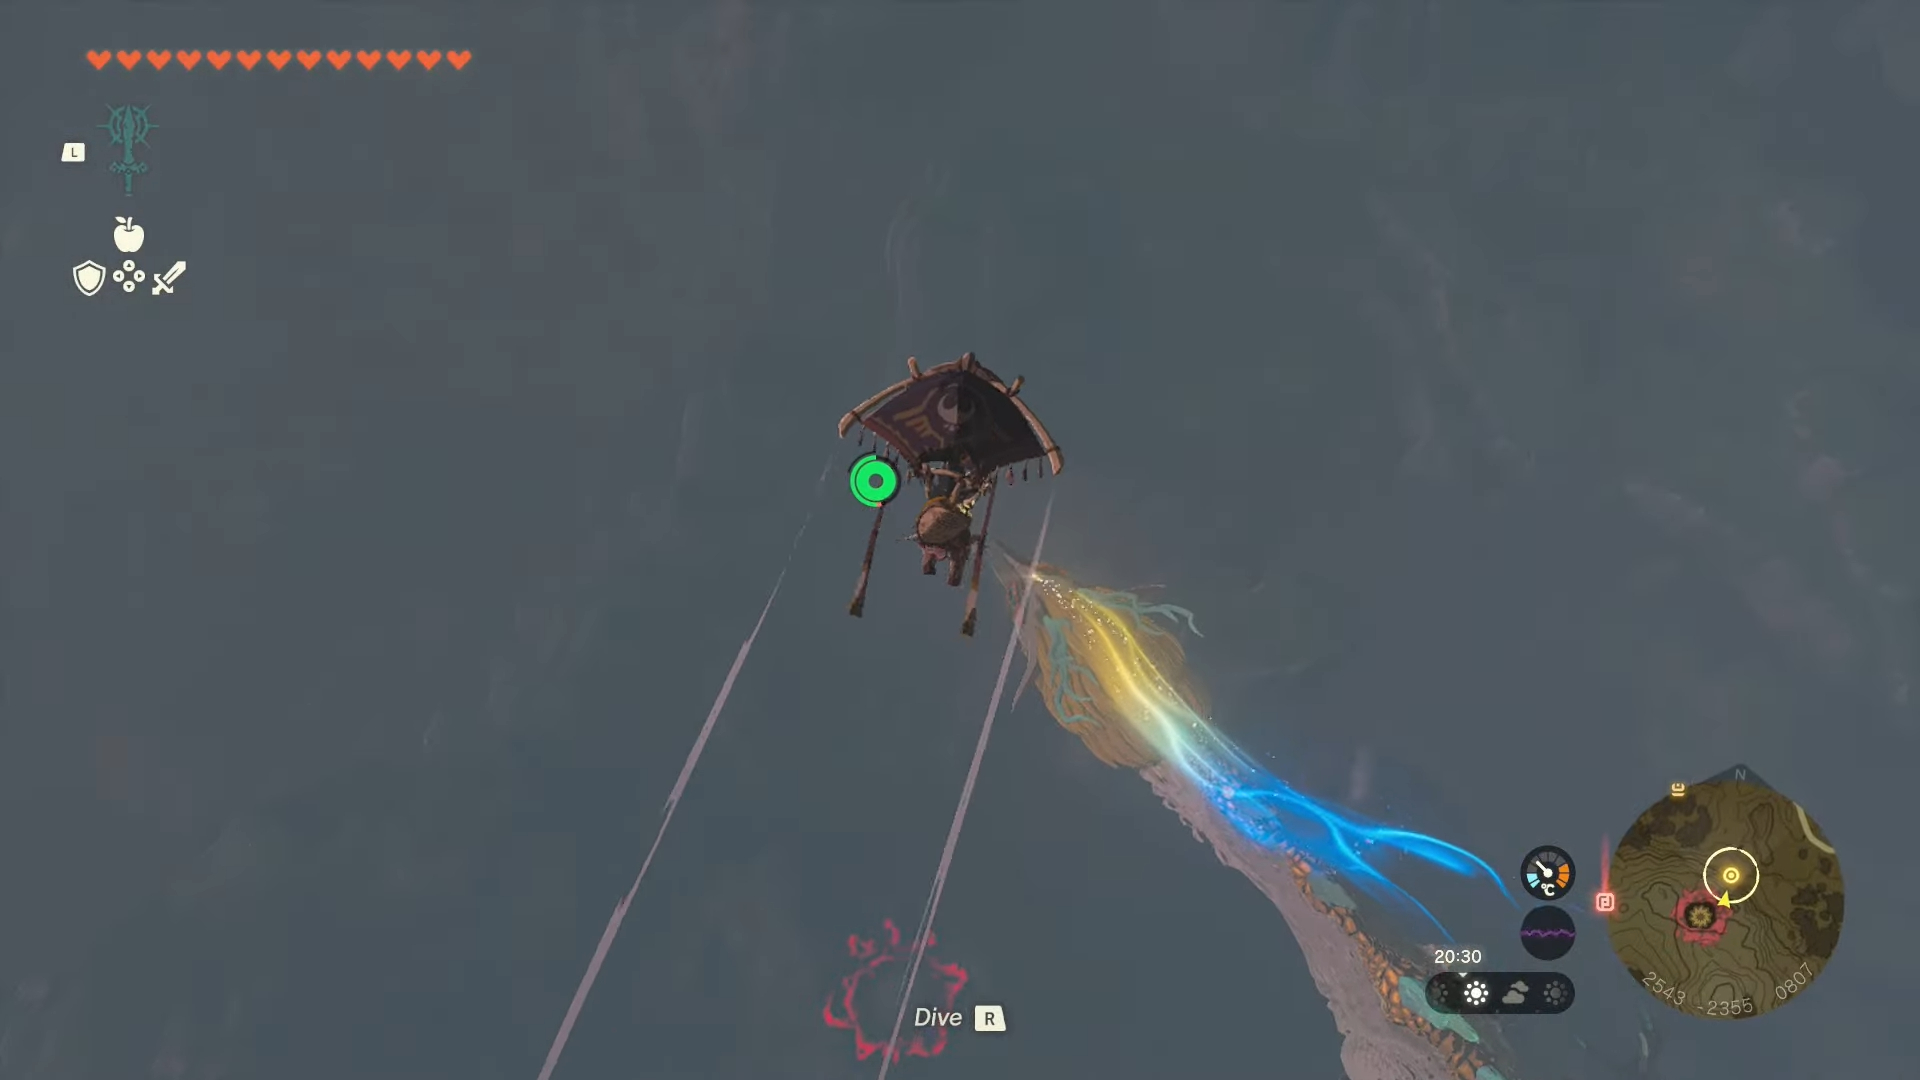 Link gliding above a glowing dragon.